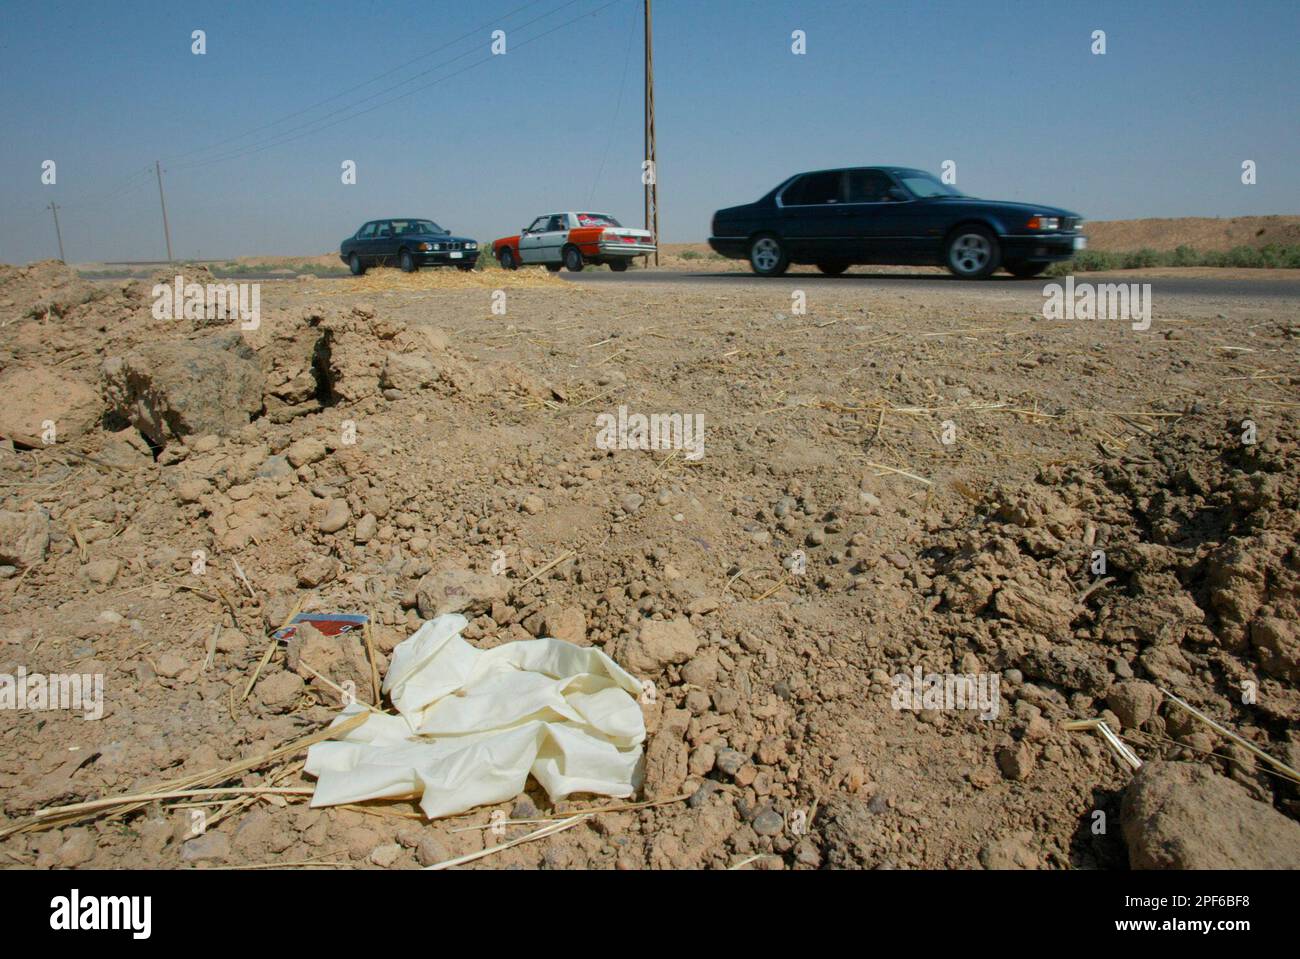 A pair of protective rubber gloves mark the place, Sunday June 29, 2003,  where the remains of two missing soldiers were found 32 kilometers (20  miles) northwest of Baghdad on Saturday. Sgt.